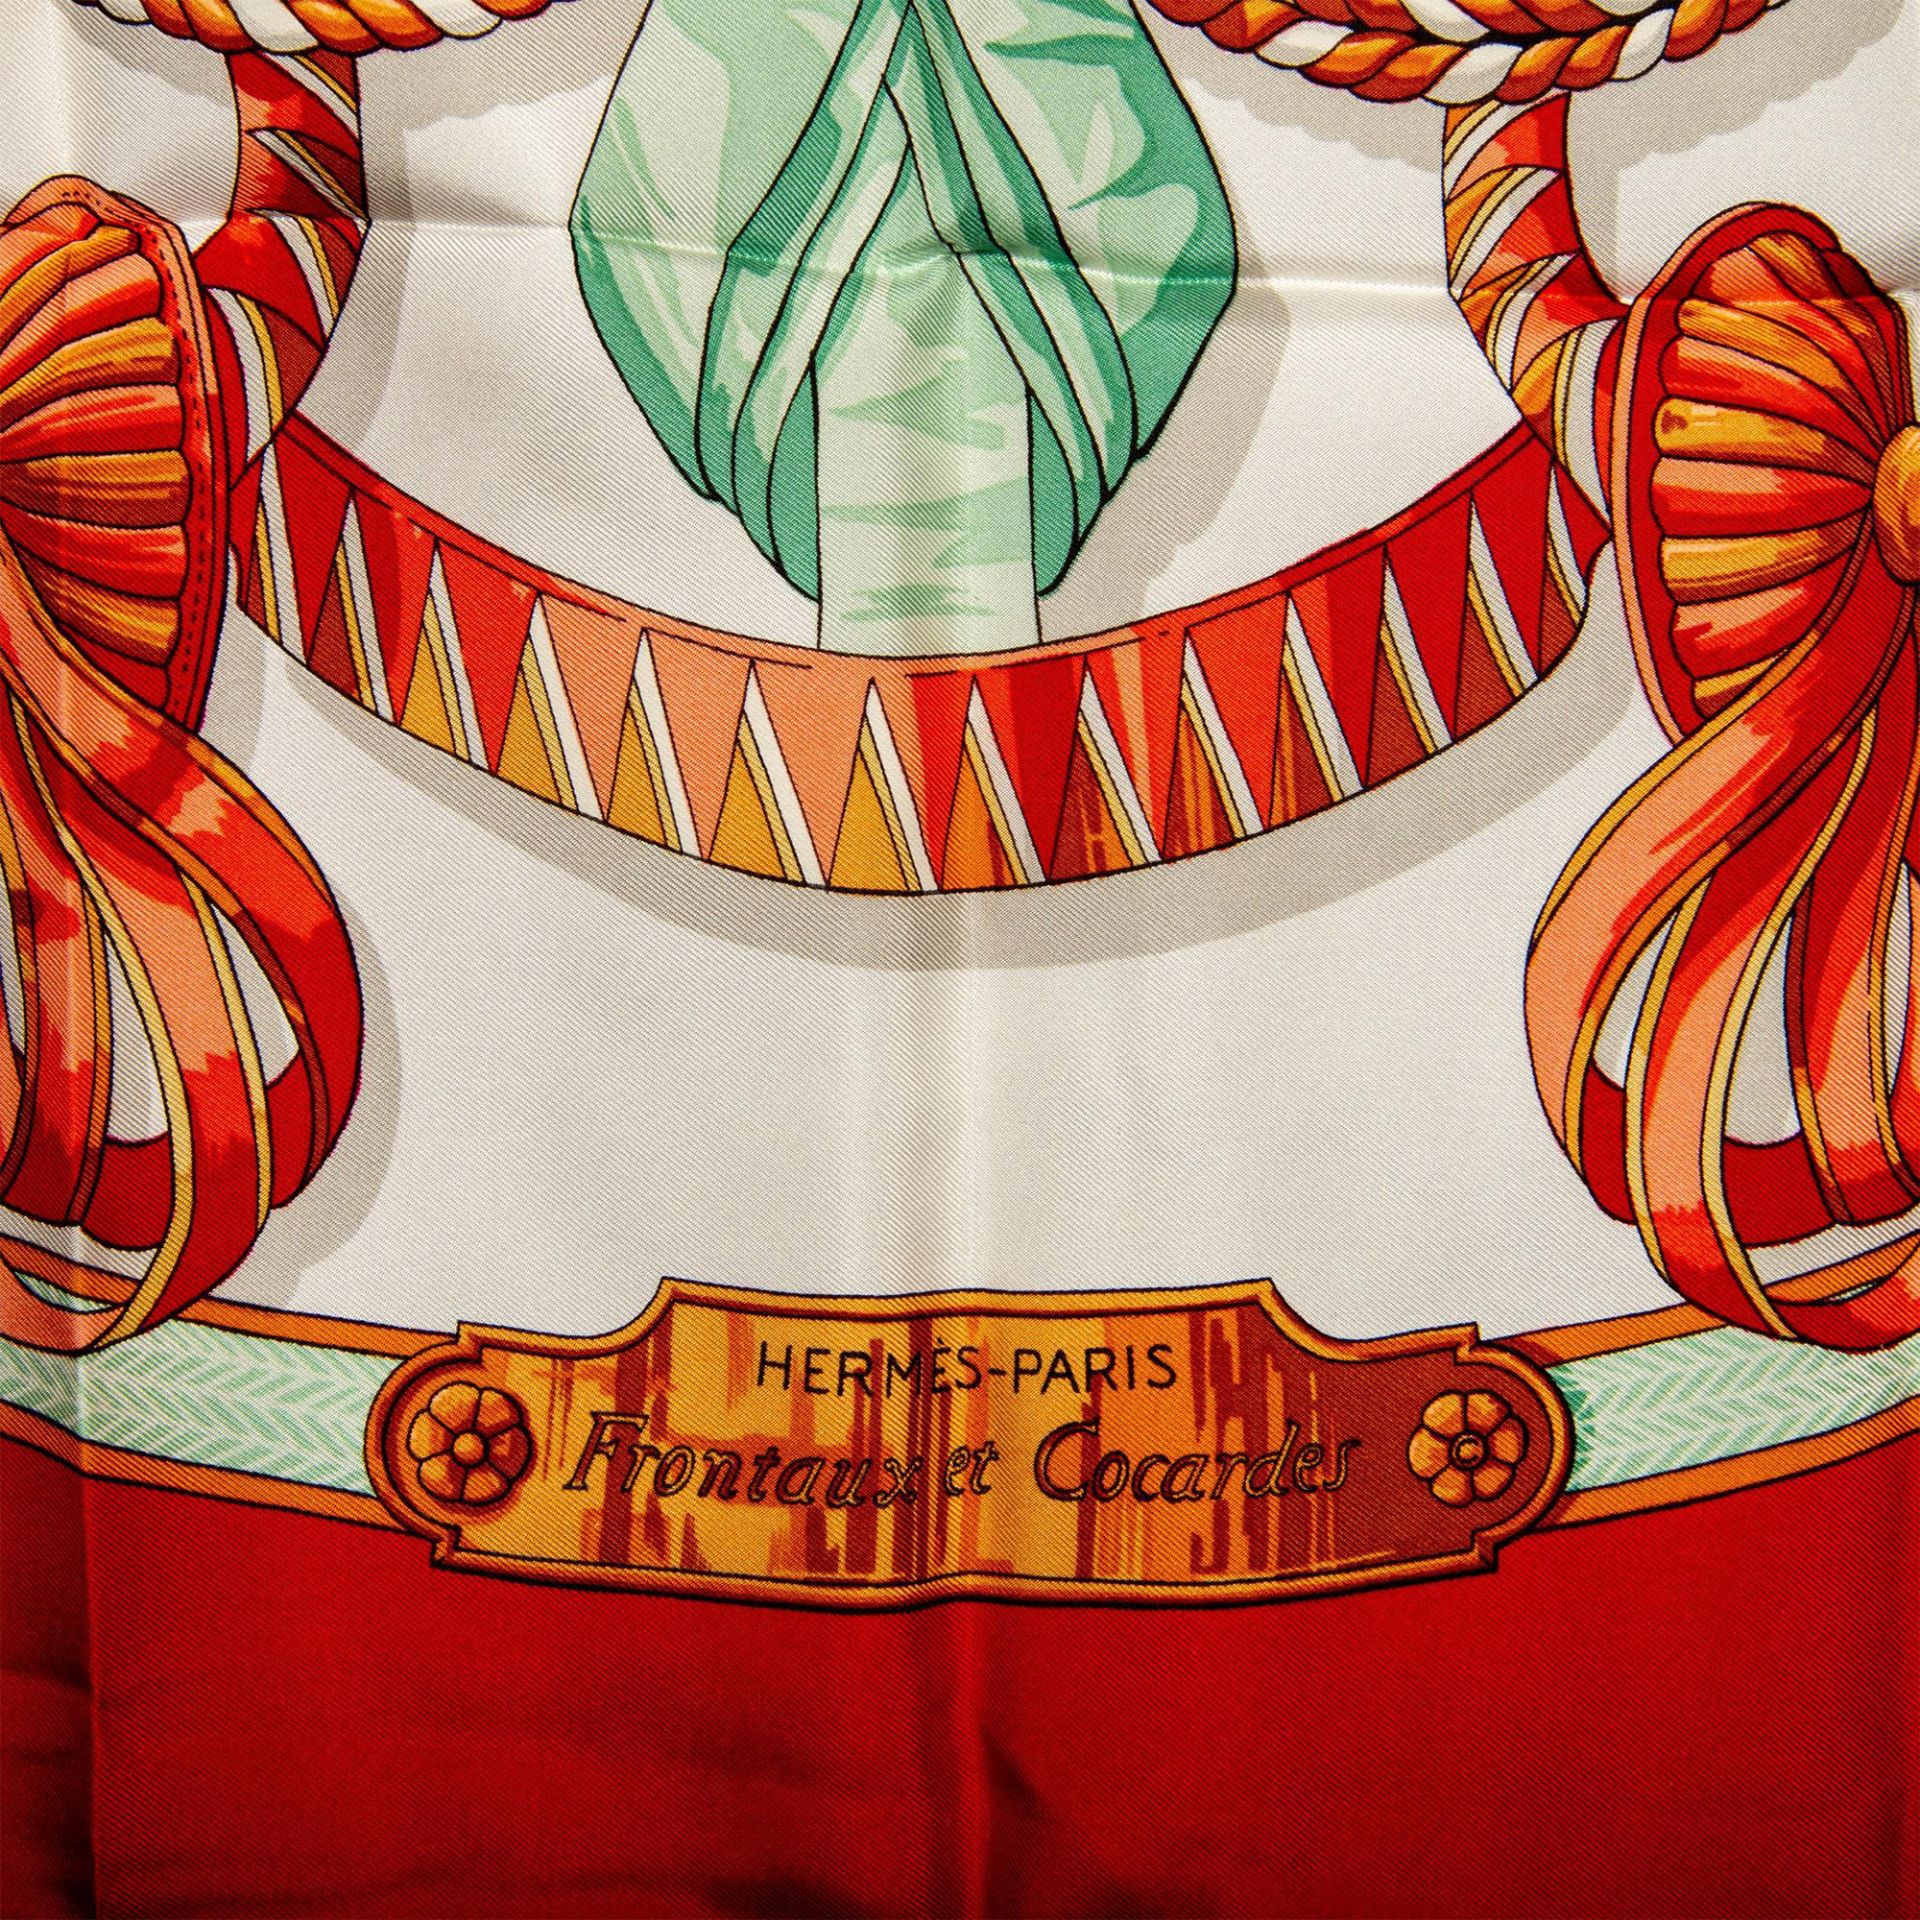 Hermes Silk Scarf, Frontaux Et Cocardes in Red - Image 5 of 8